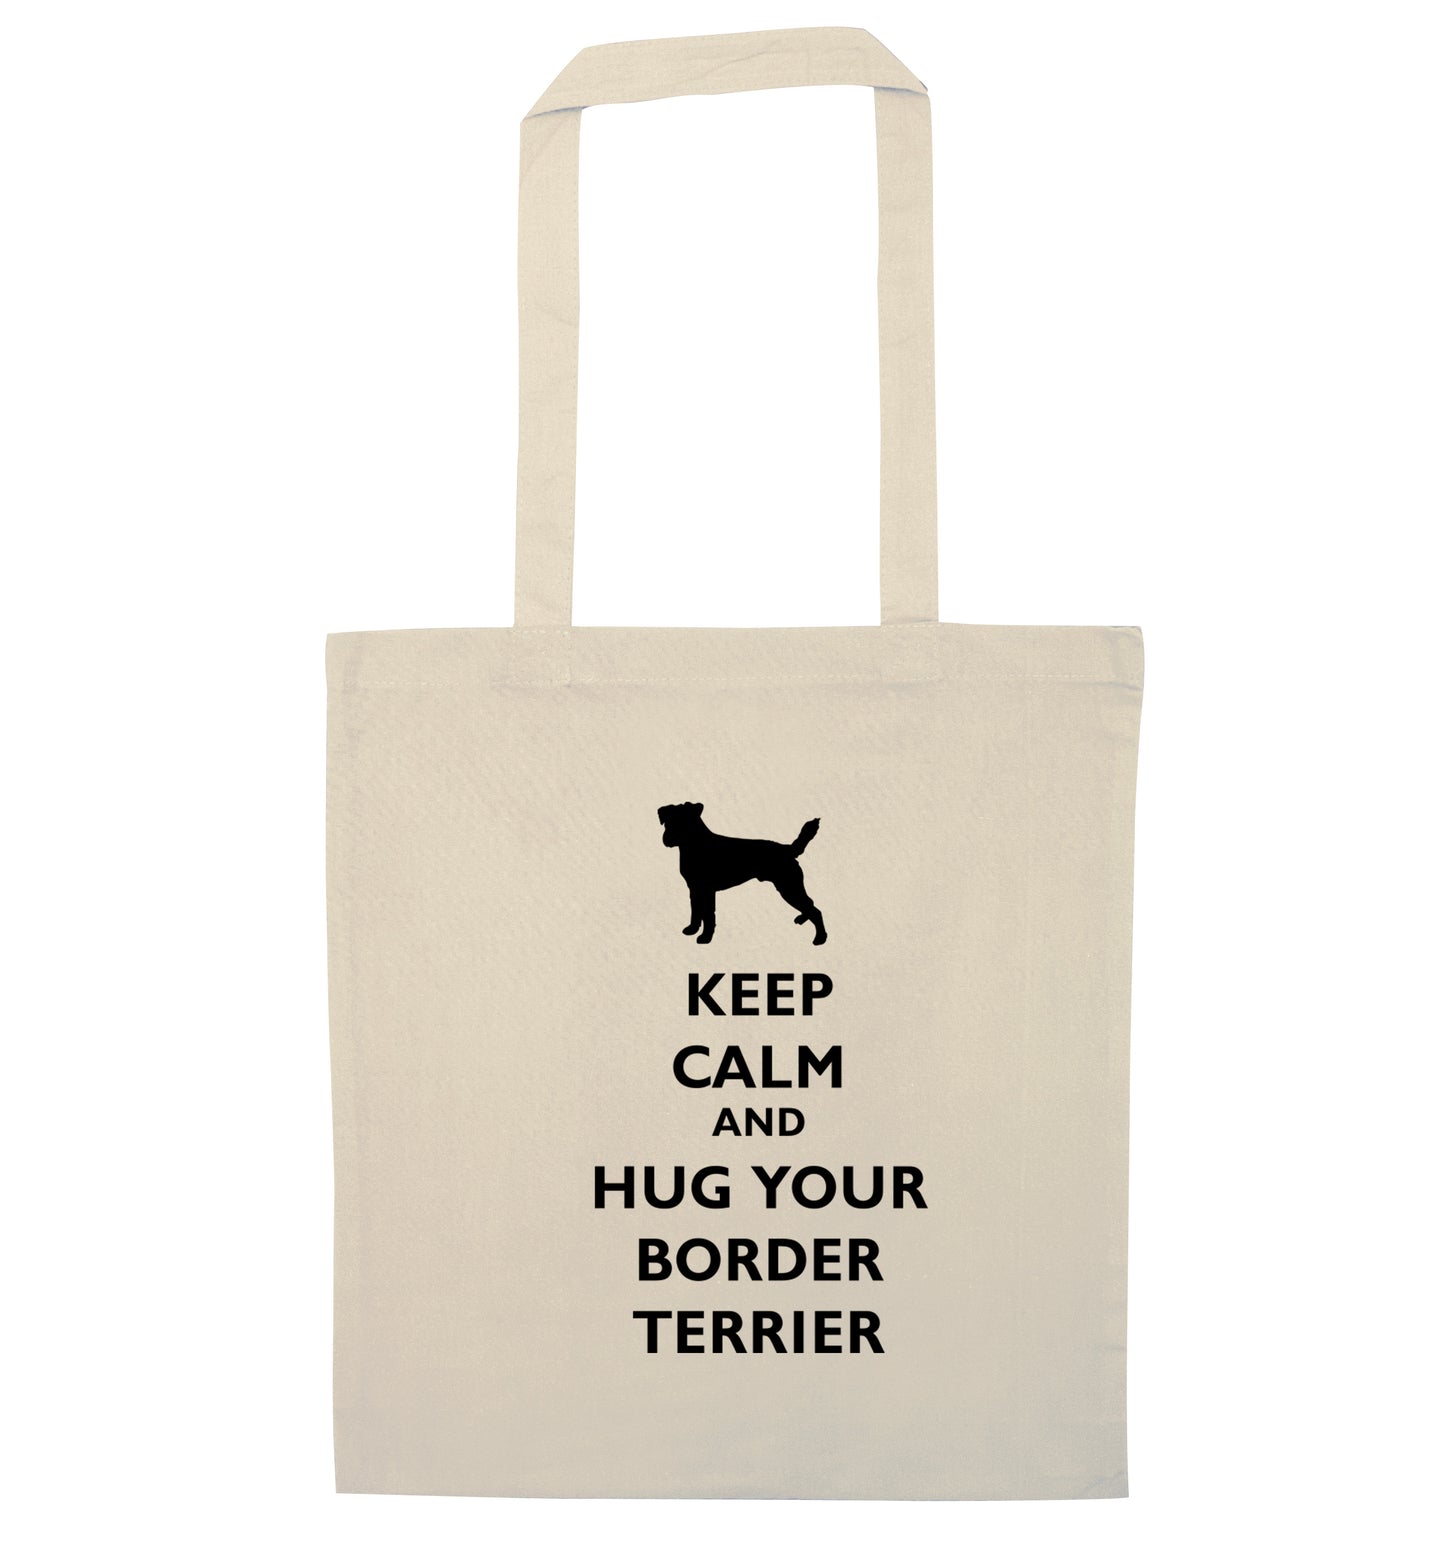 Keep calm and hug your border terrier natural tote bag